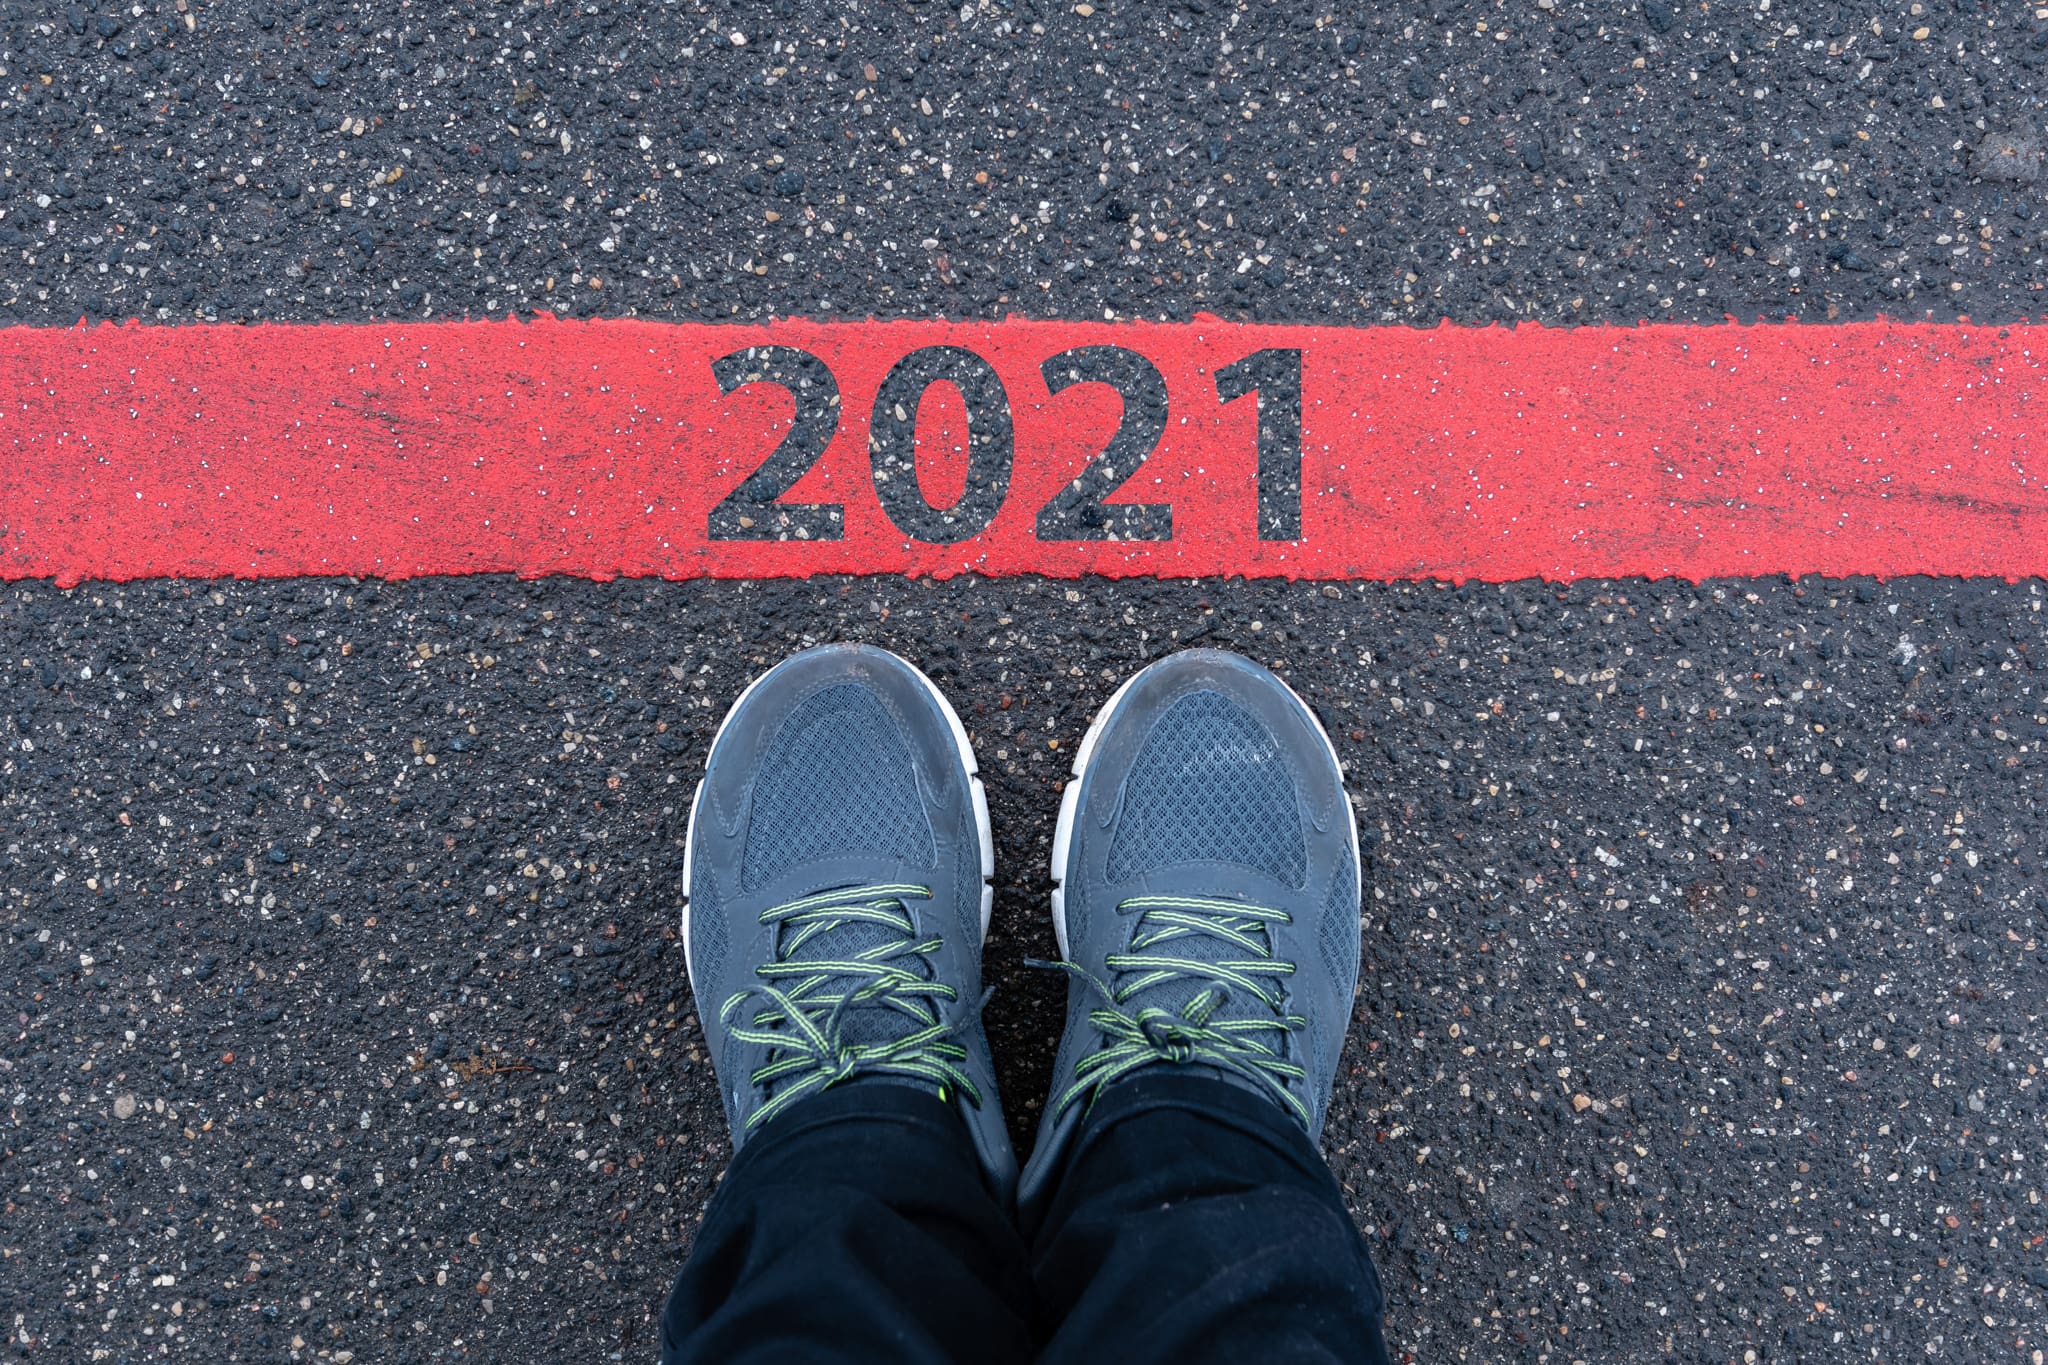 The decisions we make now can help fill 2022 with amazing possibilities